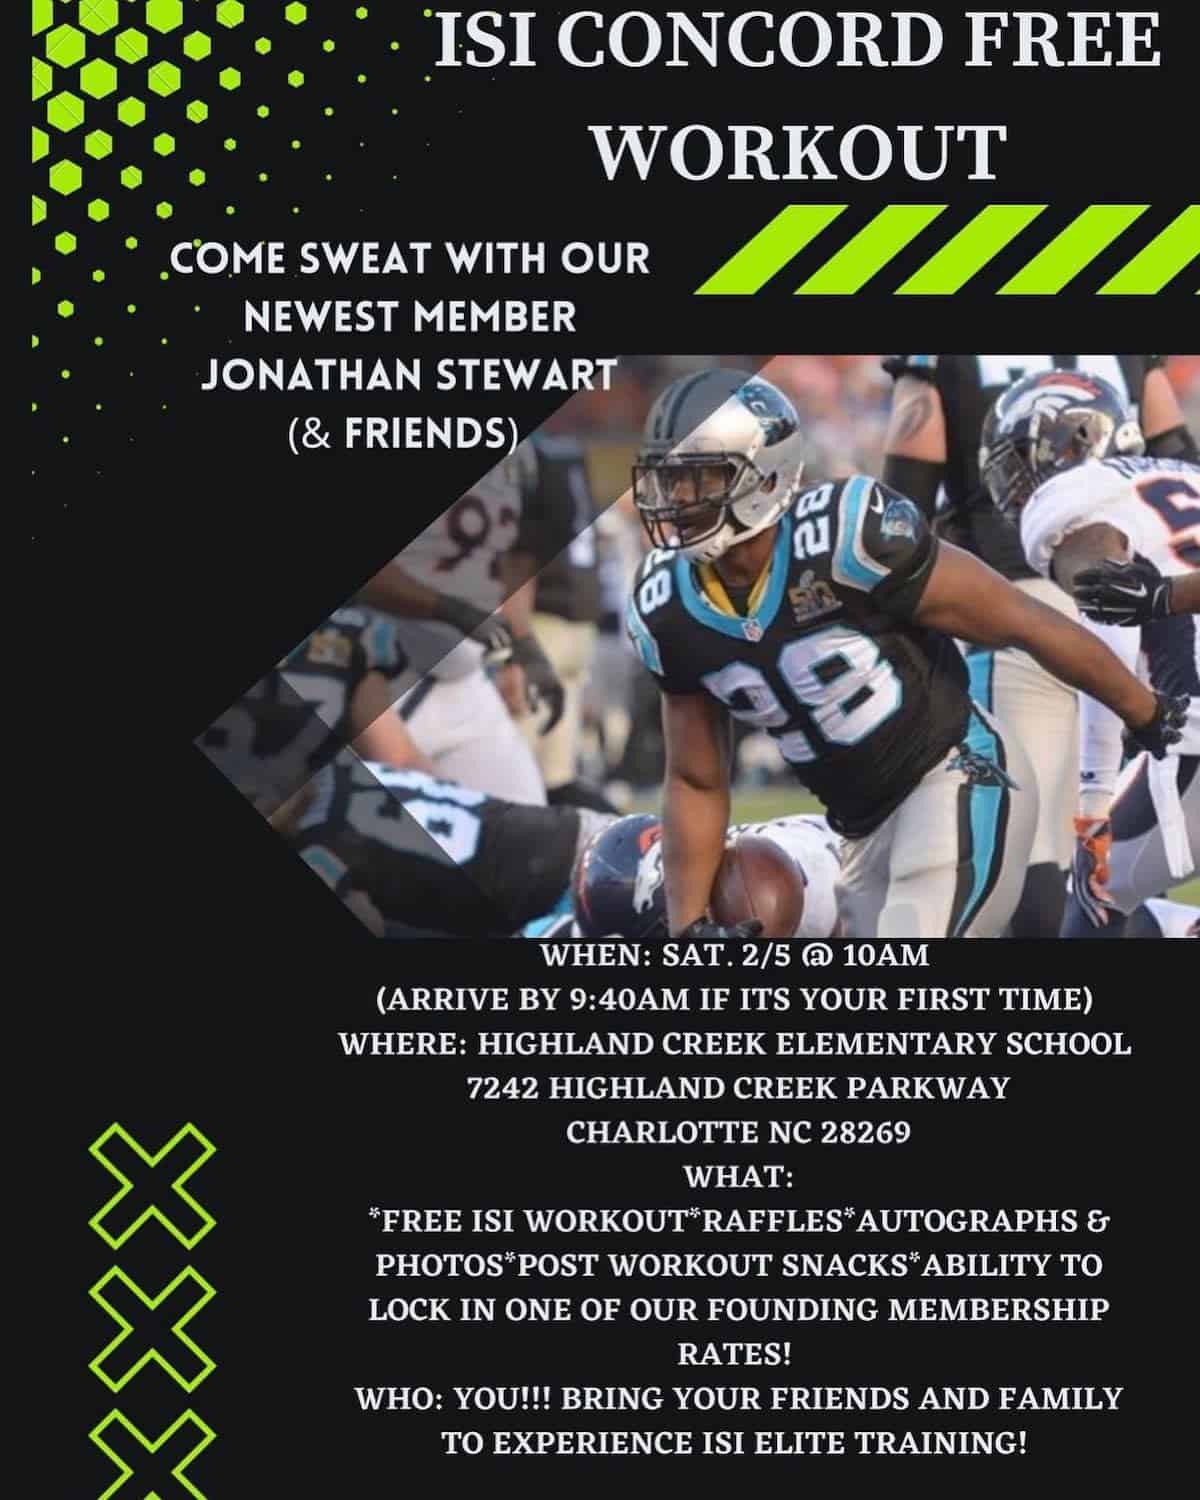 Free workout with ISI Concord and former Panther Jonathan Stewart